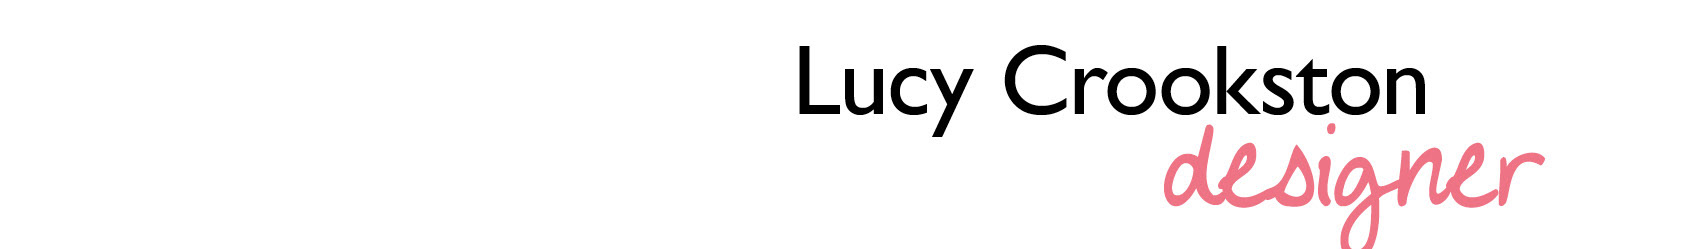 Lucy Crookston's profile banner